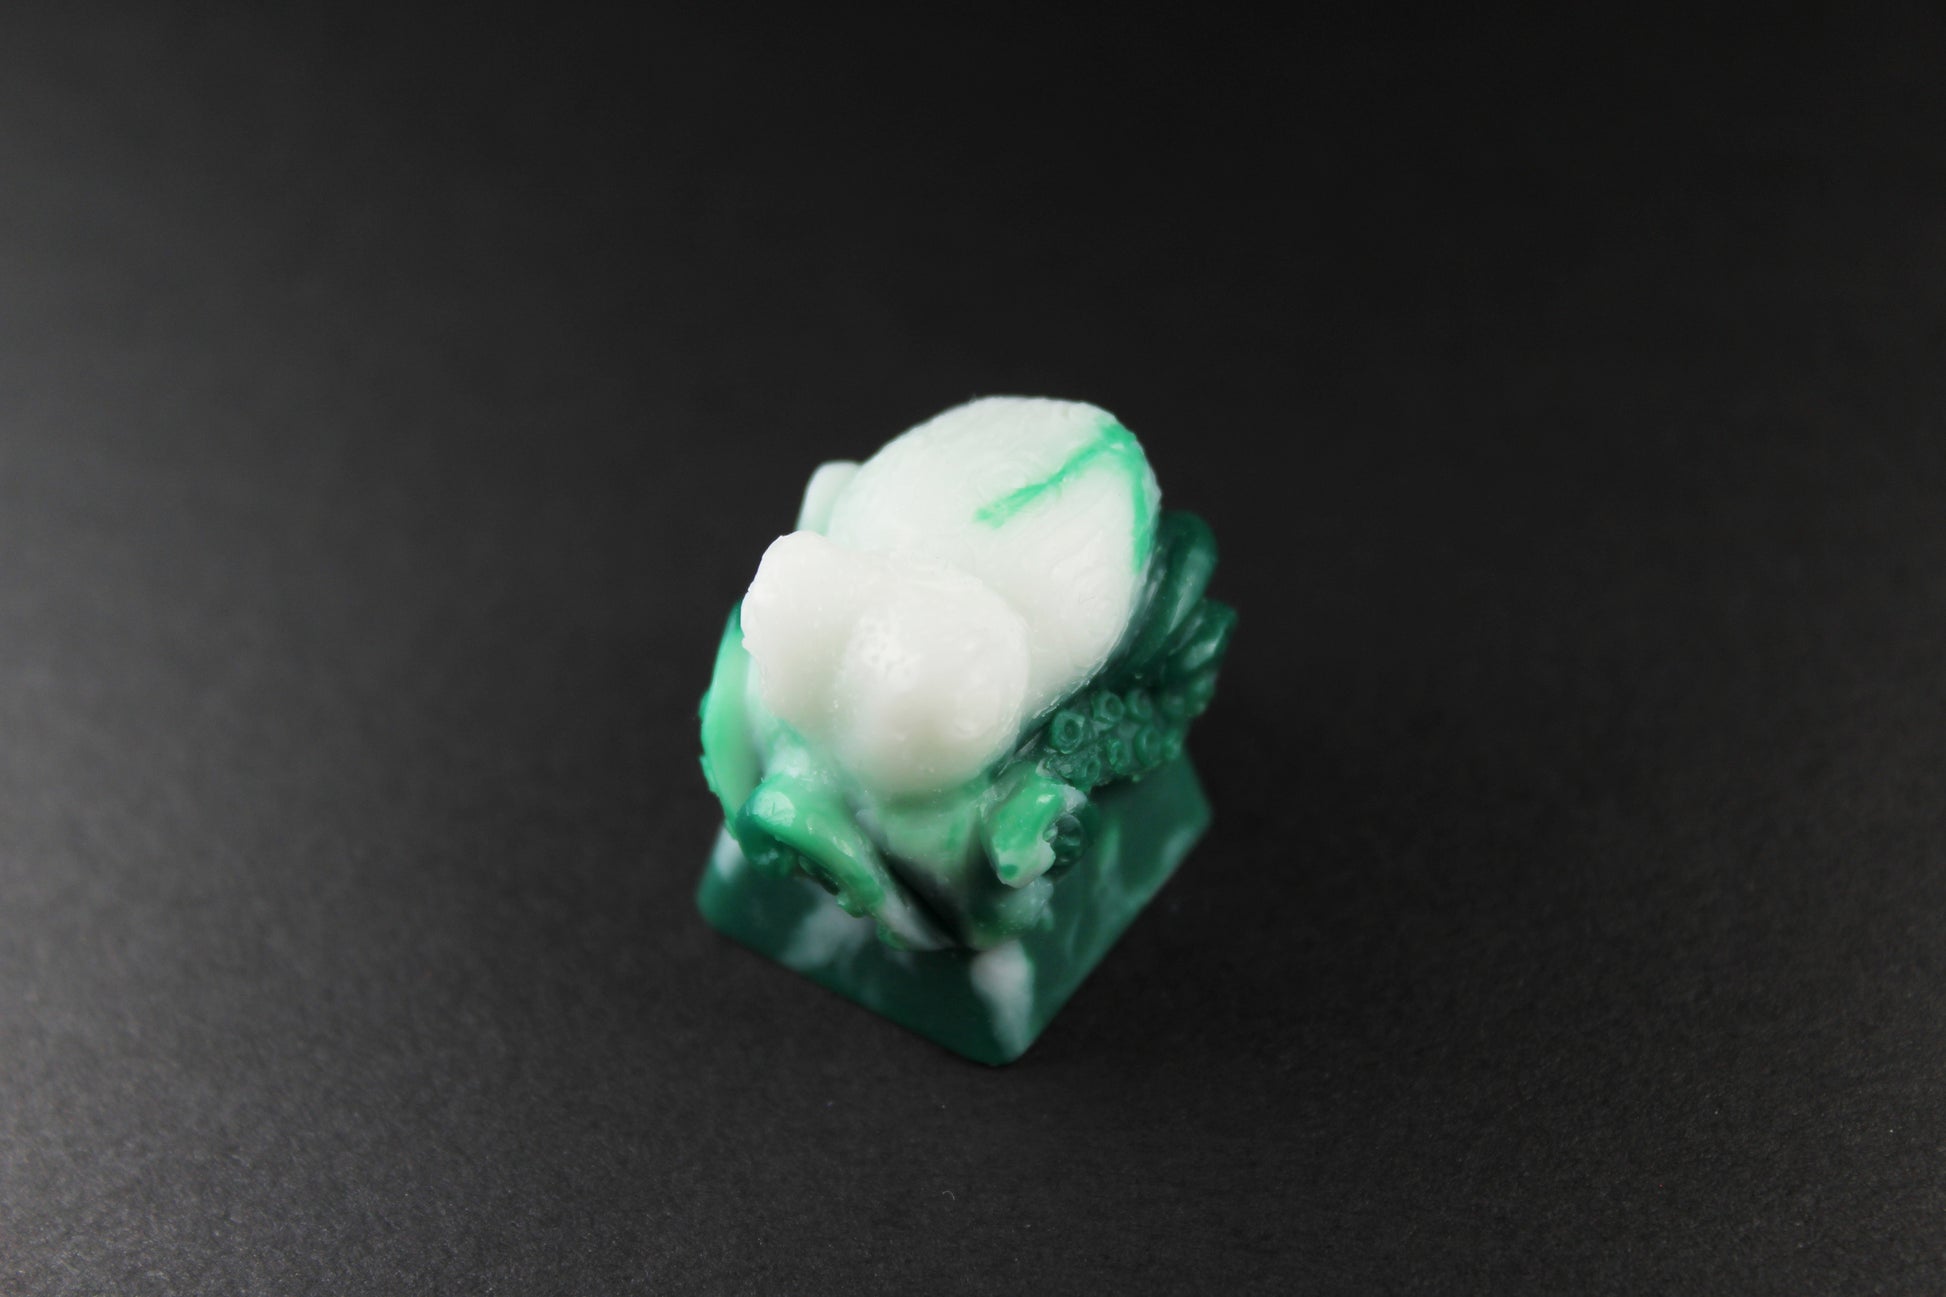 Gimpy- Klacken 3- White Green Swirl 2 - PrimeCaps Keycap - Blank and Sculpted Artisan Keycaps for cherry MX mechanical keyboards 